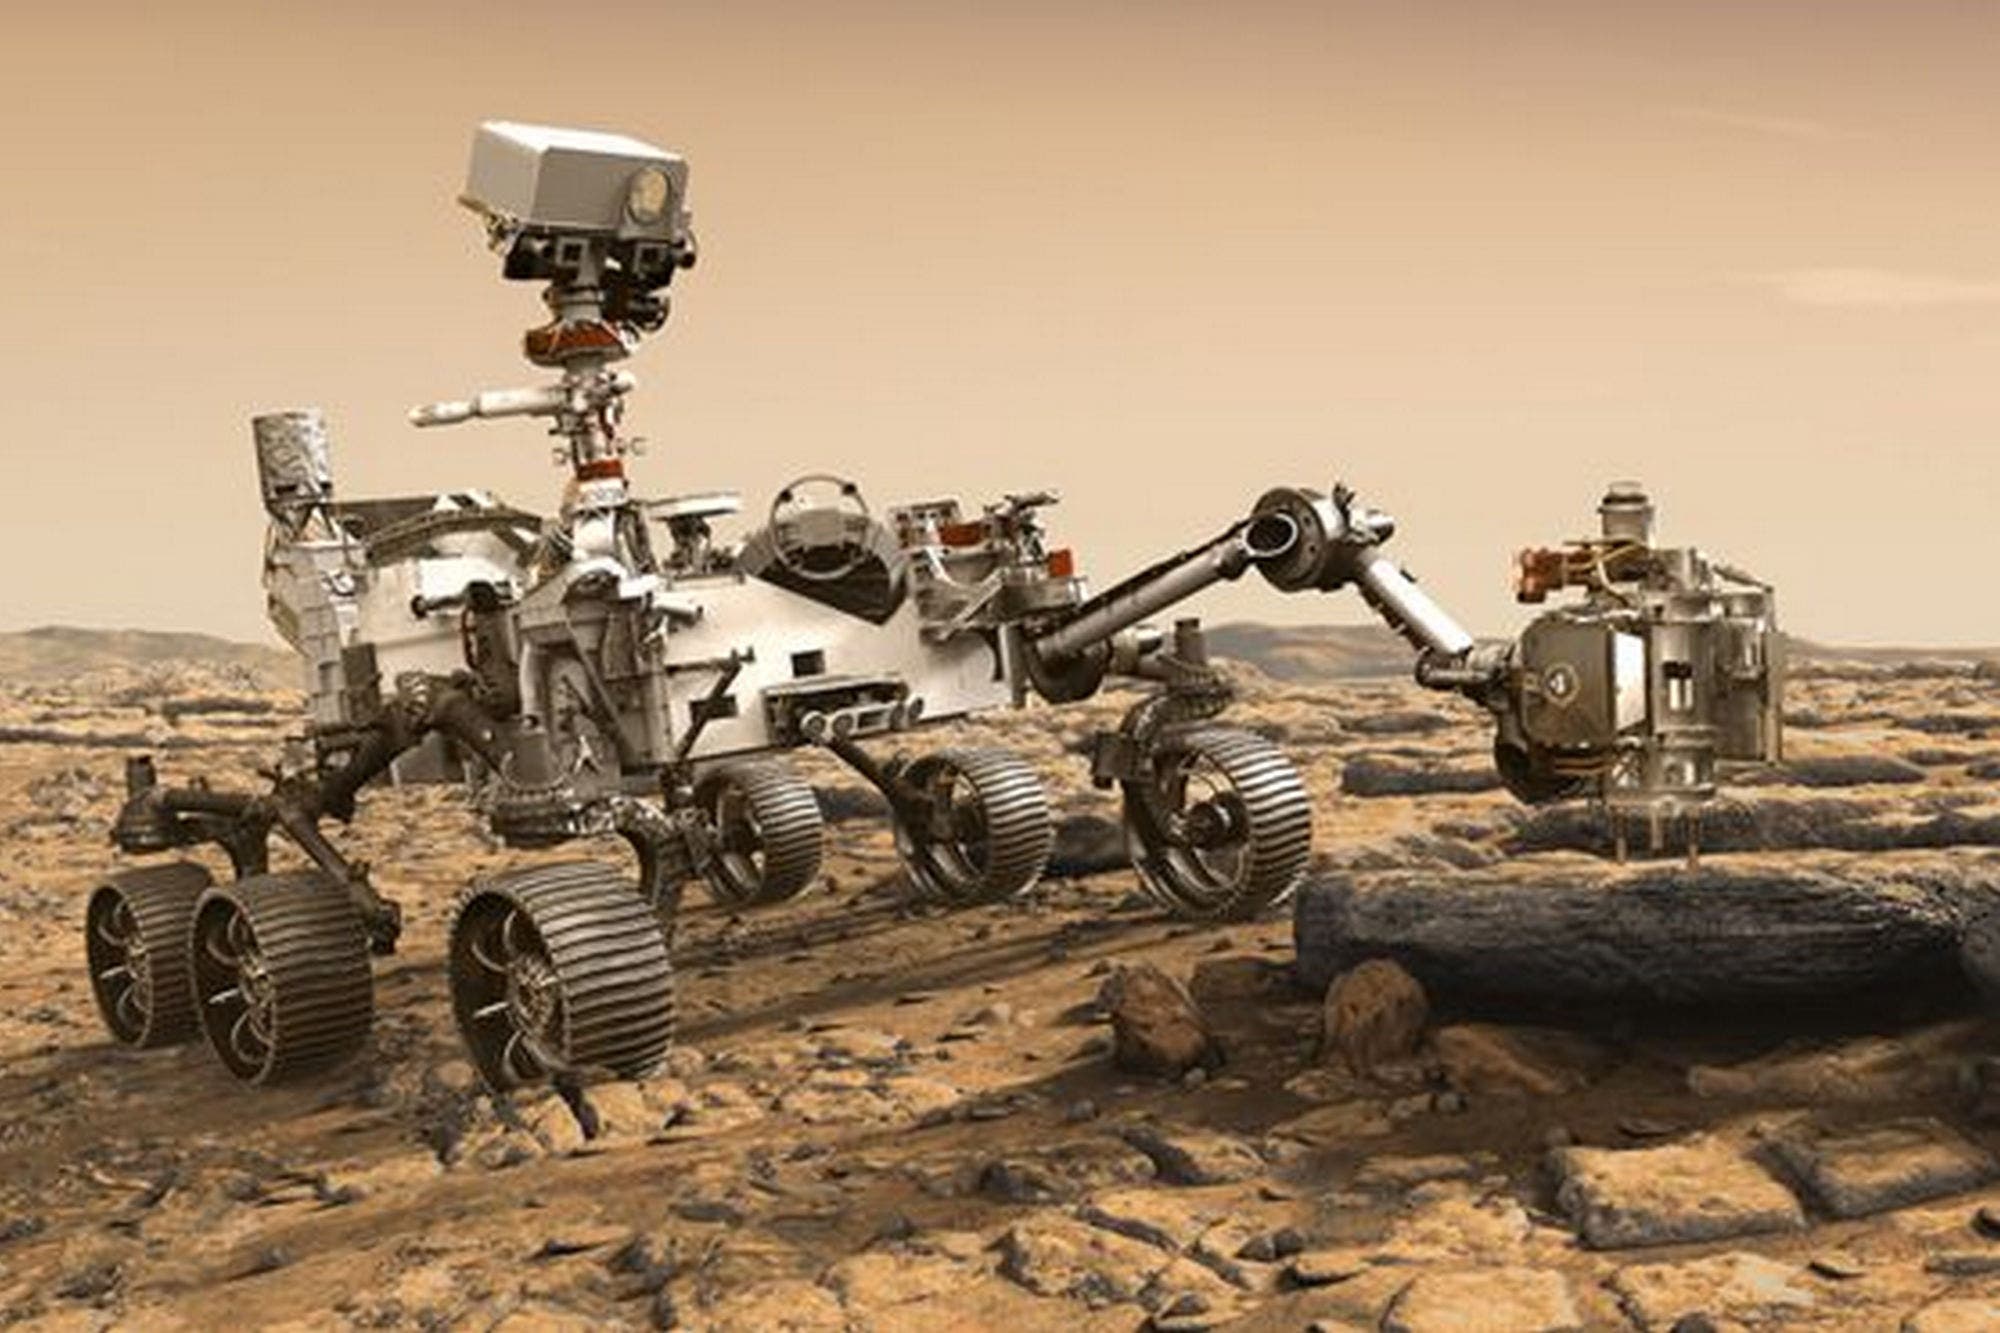 Mars 2020, NASA's exploration vehicle that try to answer the most disturbing questions about Mars